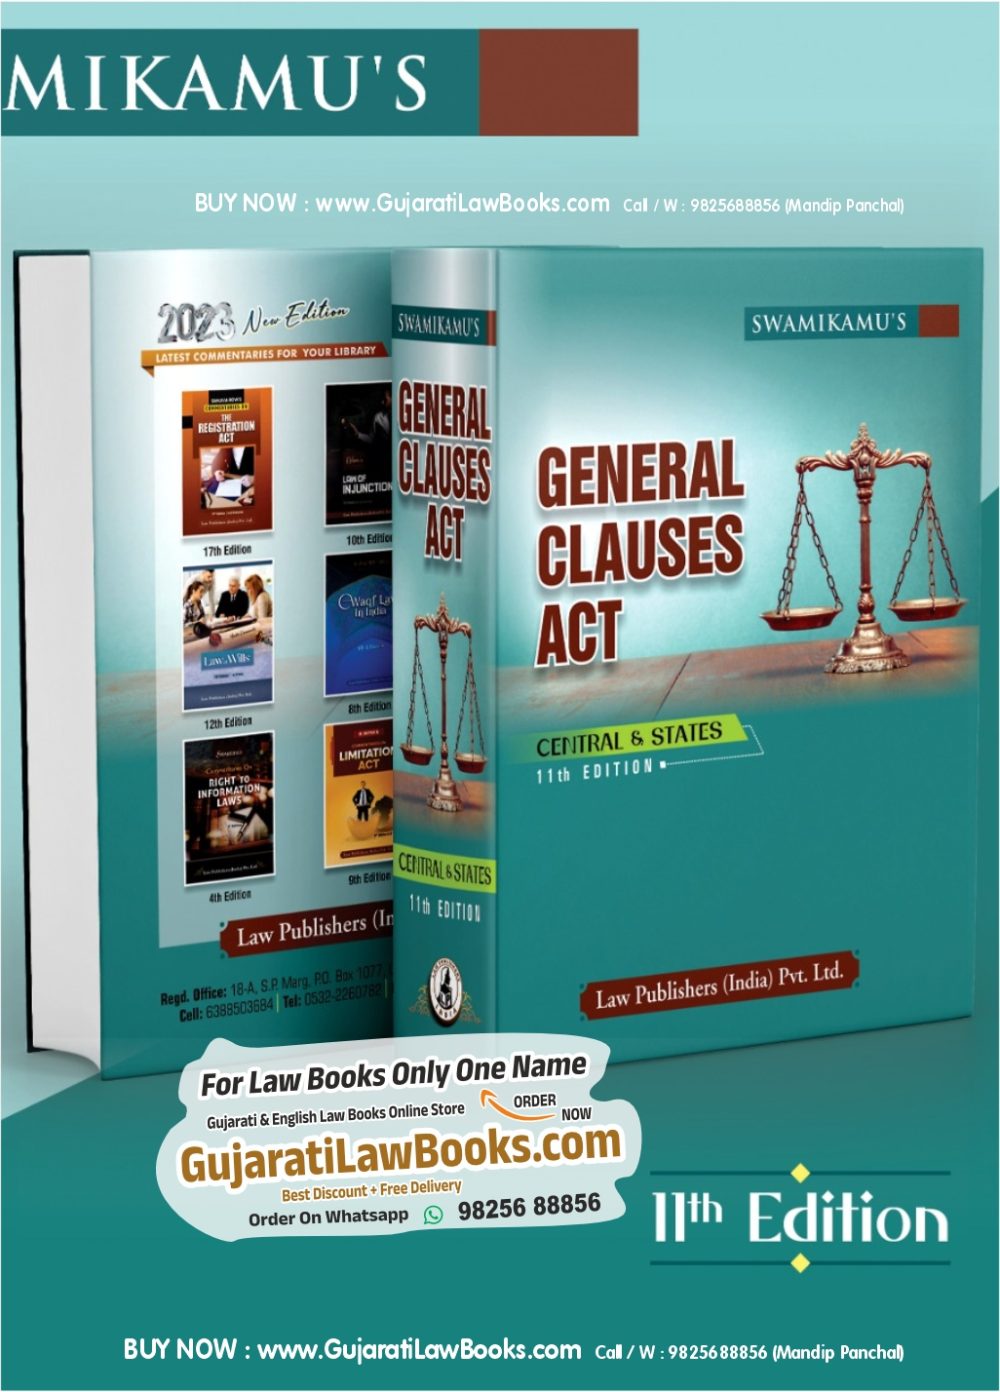 Swamikamu's - General Clauses Act - Central & States - Latest 11th Edition in 2 Volumes by Law Publishers